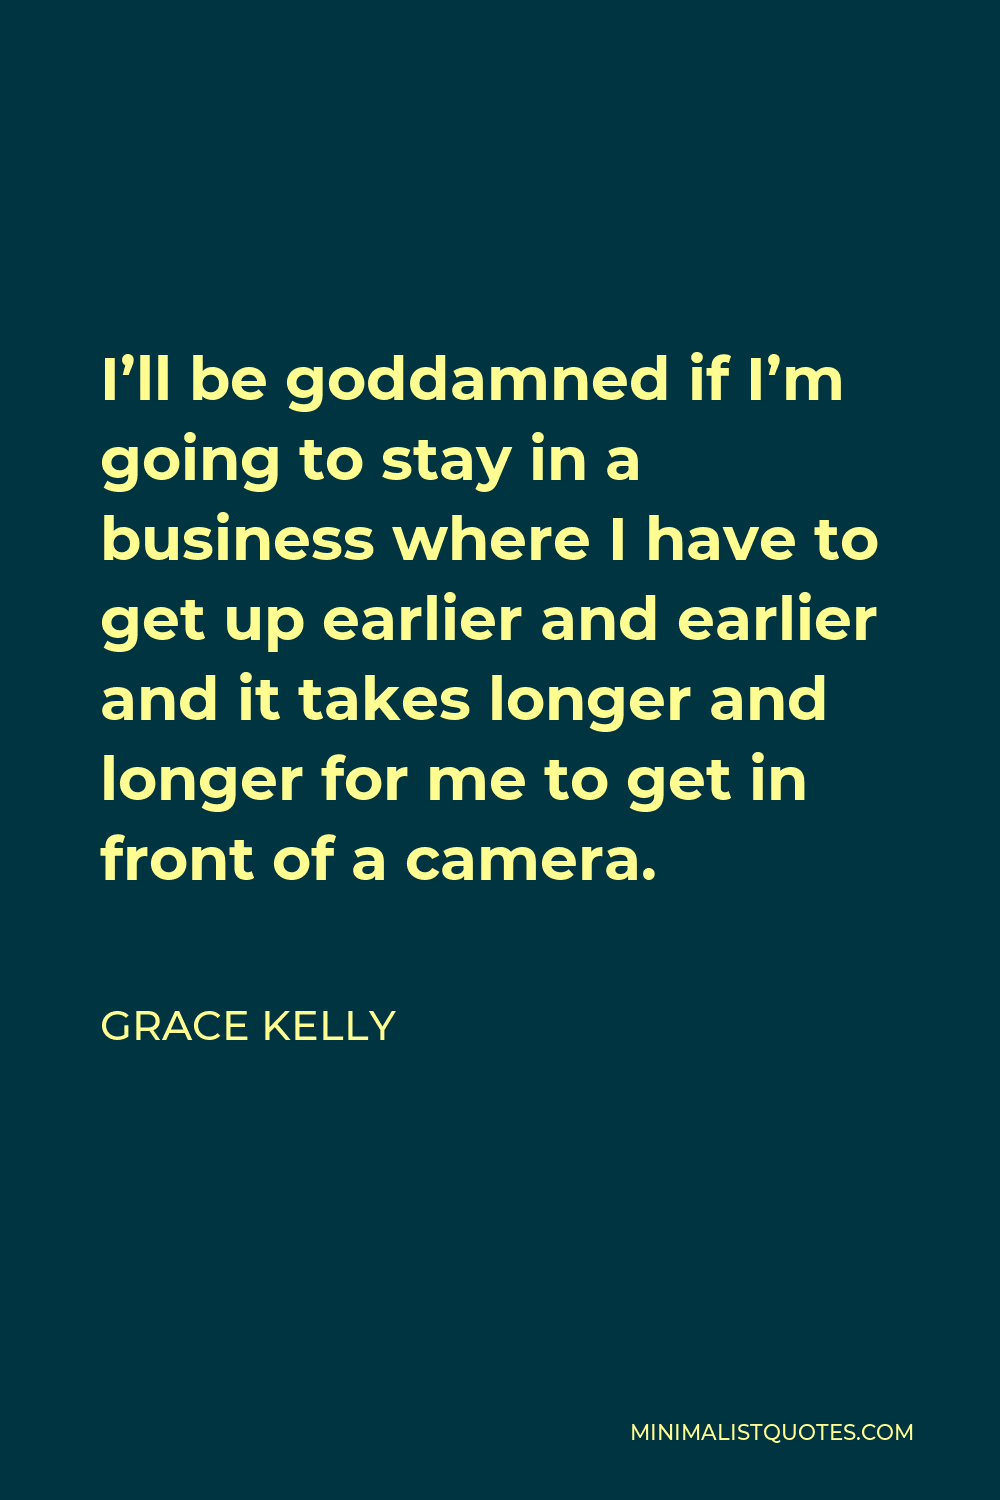 Grace Kelly Quote - I’ll be goddamned if I’m going to stay in a business where I have to get up earlier and earlier and it takes longer and longer for me to get in front of a camera.